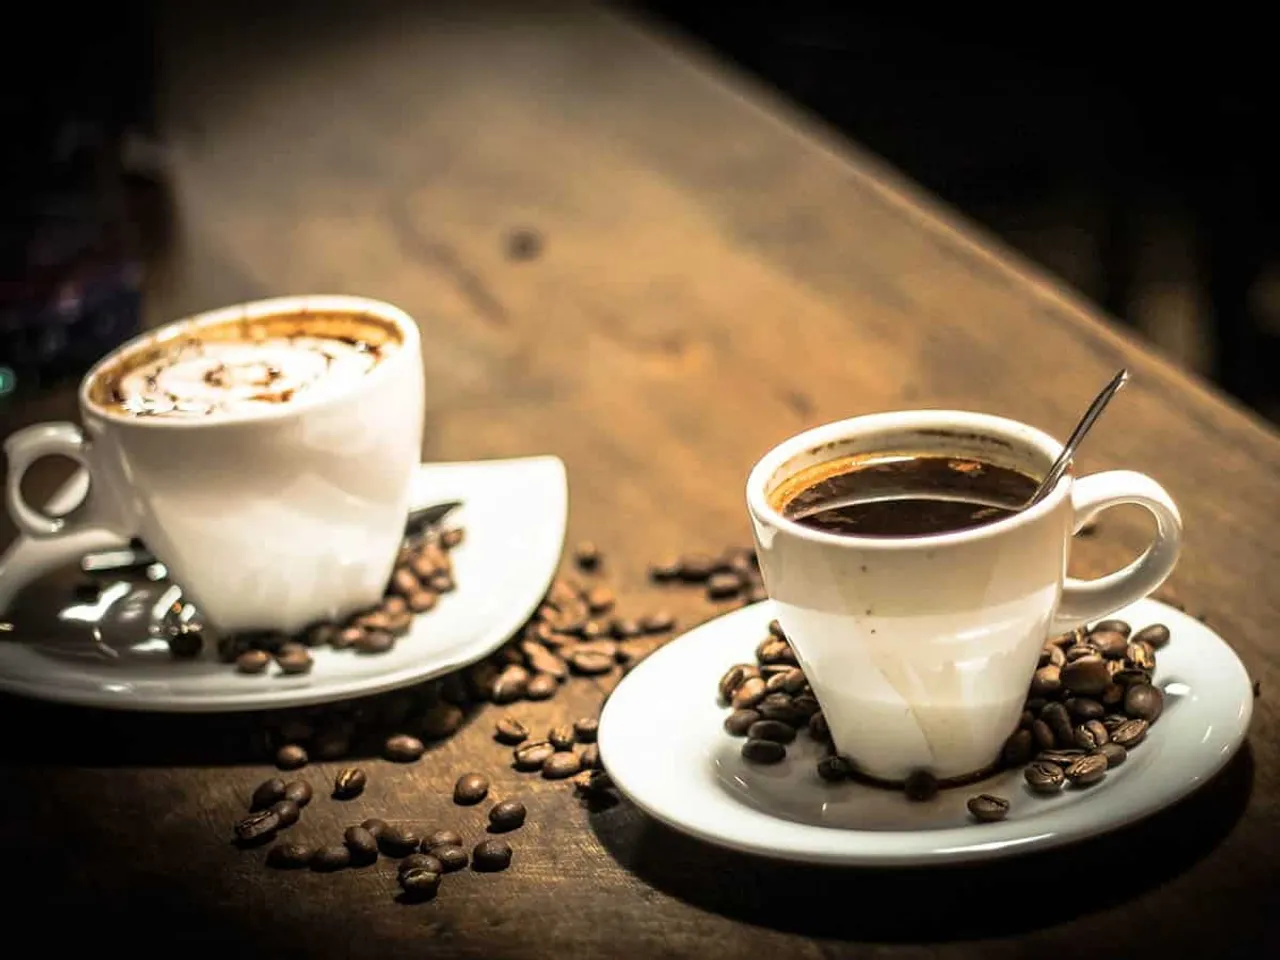 Espresso coffee may prevent Alzheimer's symptoms, lab study finds